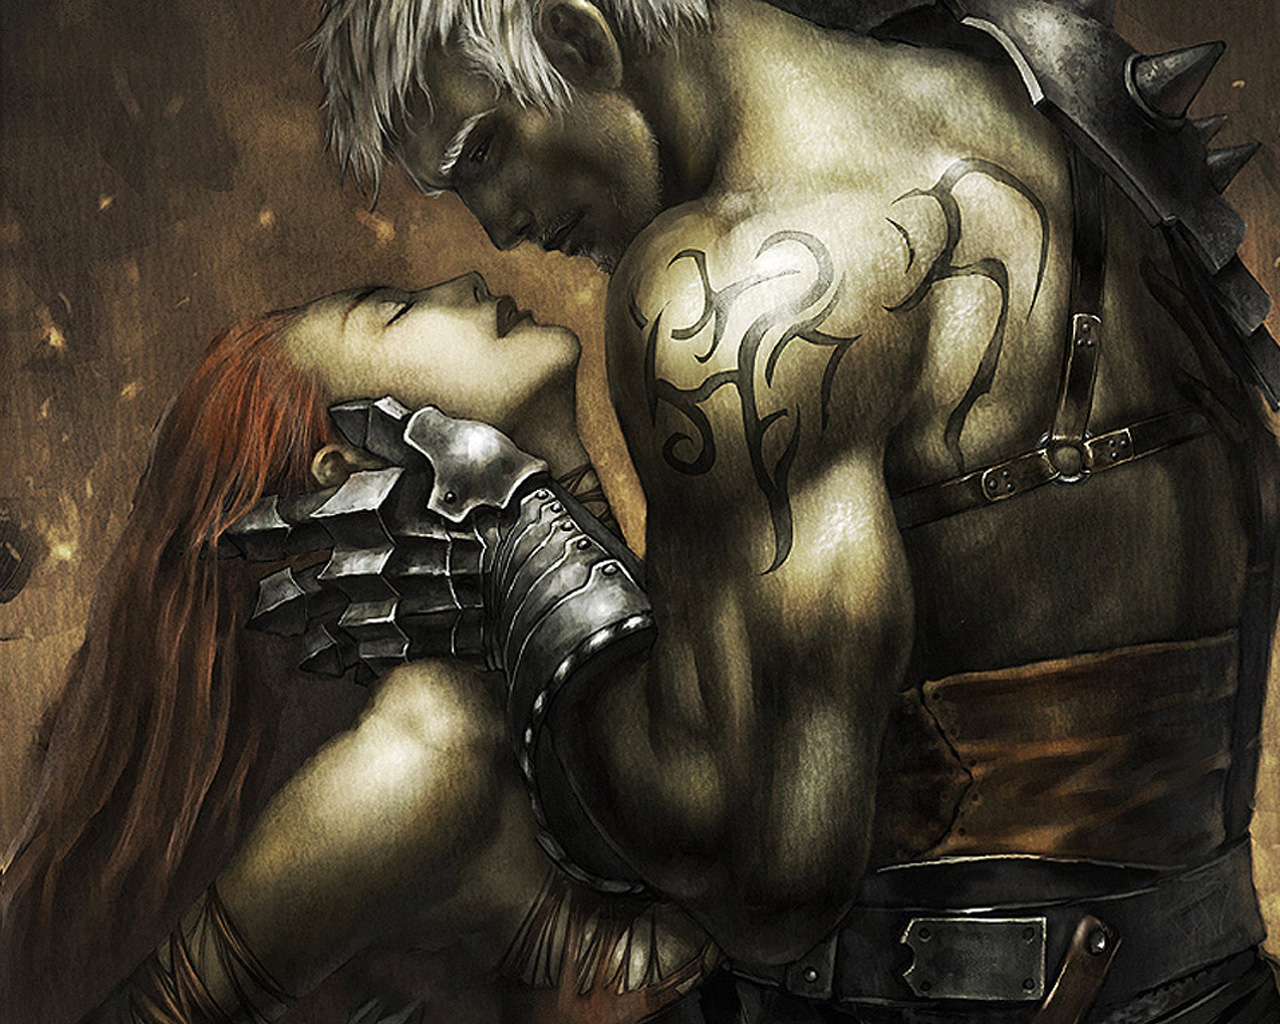 Almost Certainly Nsfw Male Warriors In Fantasy Art That Are Heavily